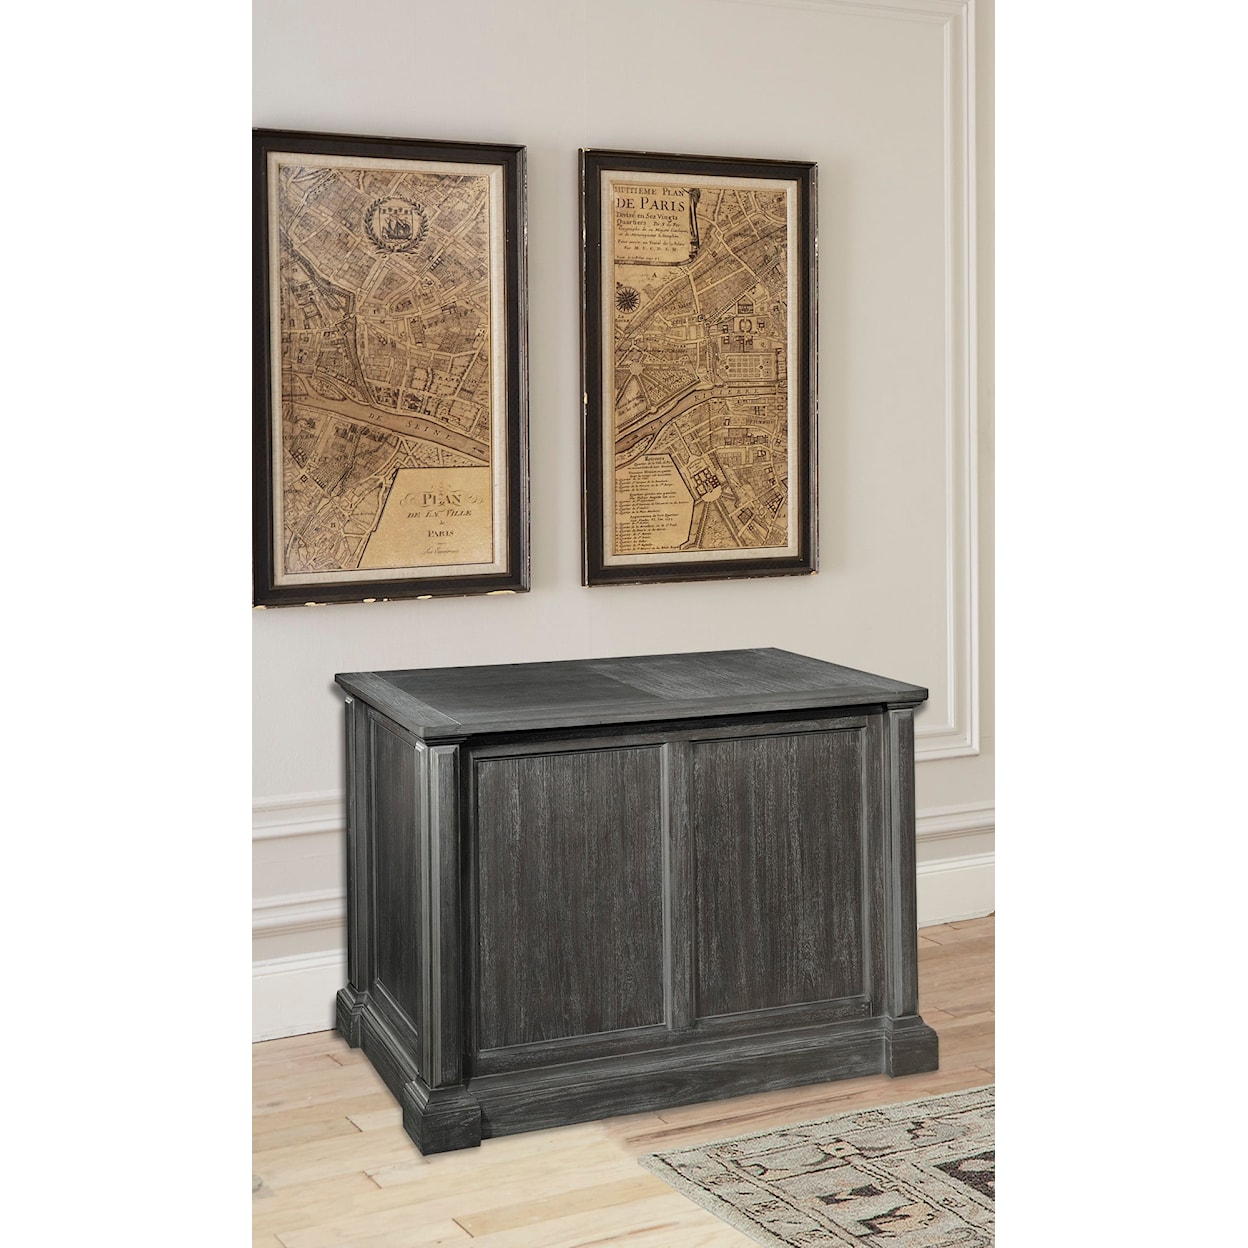 Paramount Furniture Gramercy Park Lateral File